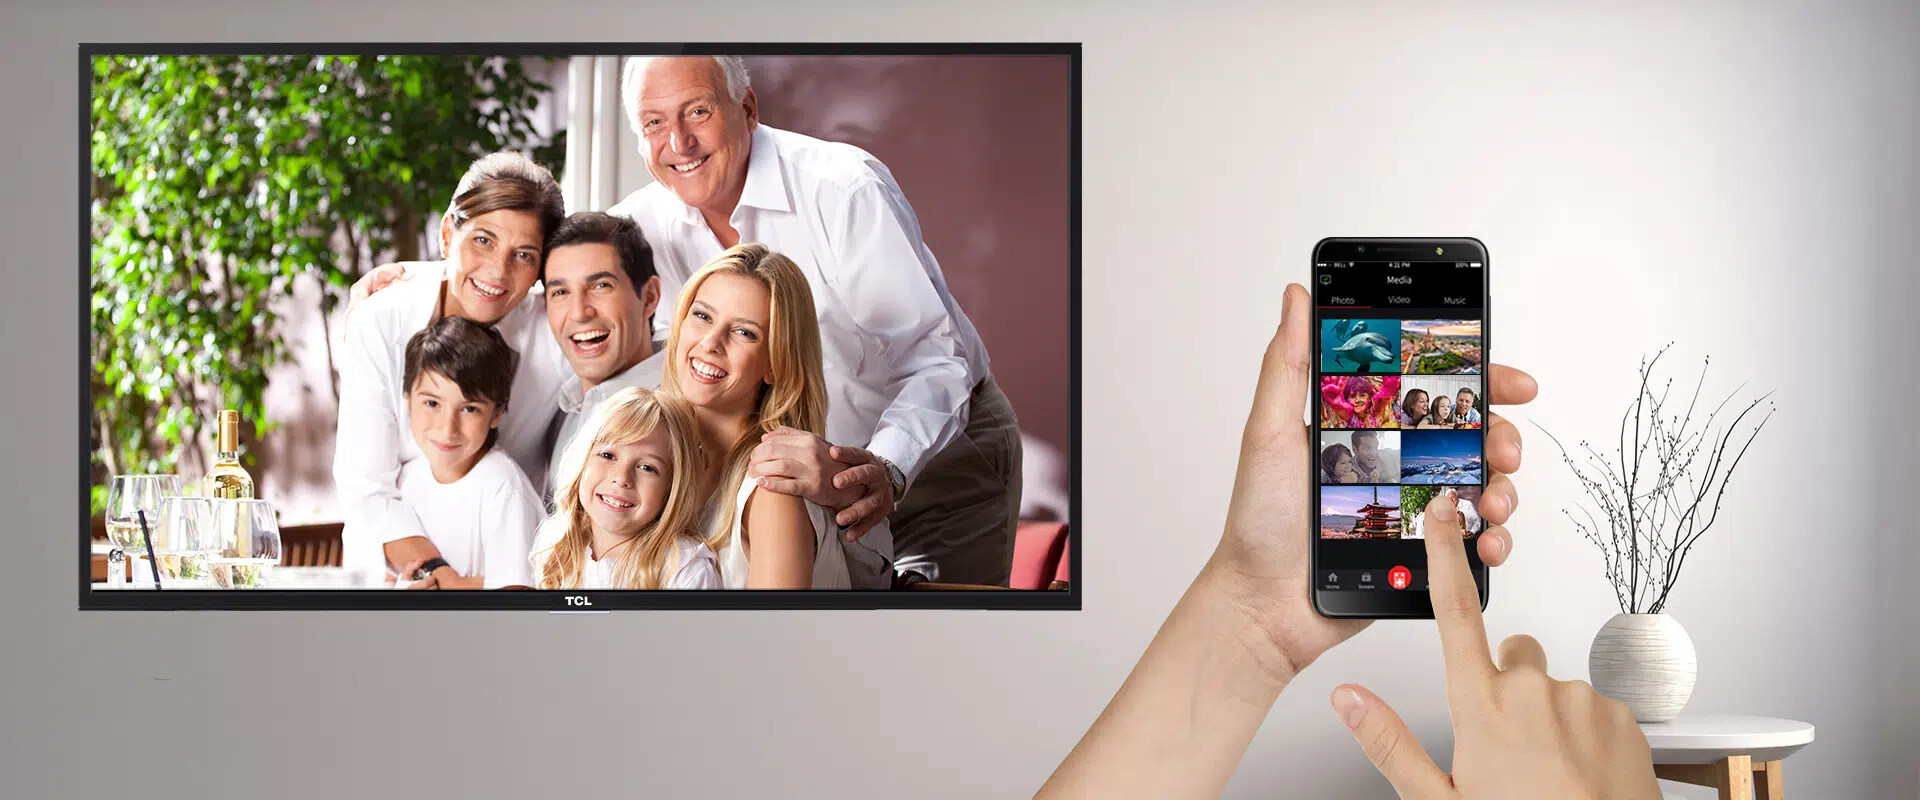 phone-screen-mirroring-a-comprehensive-guide-to-tv